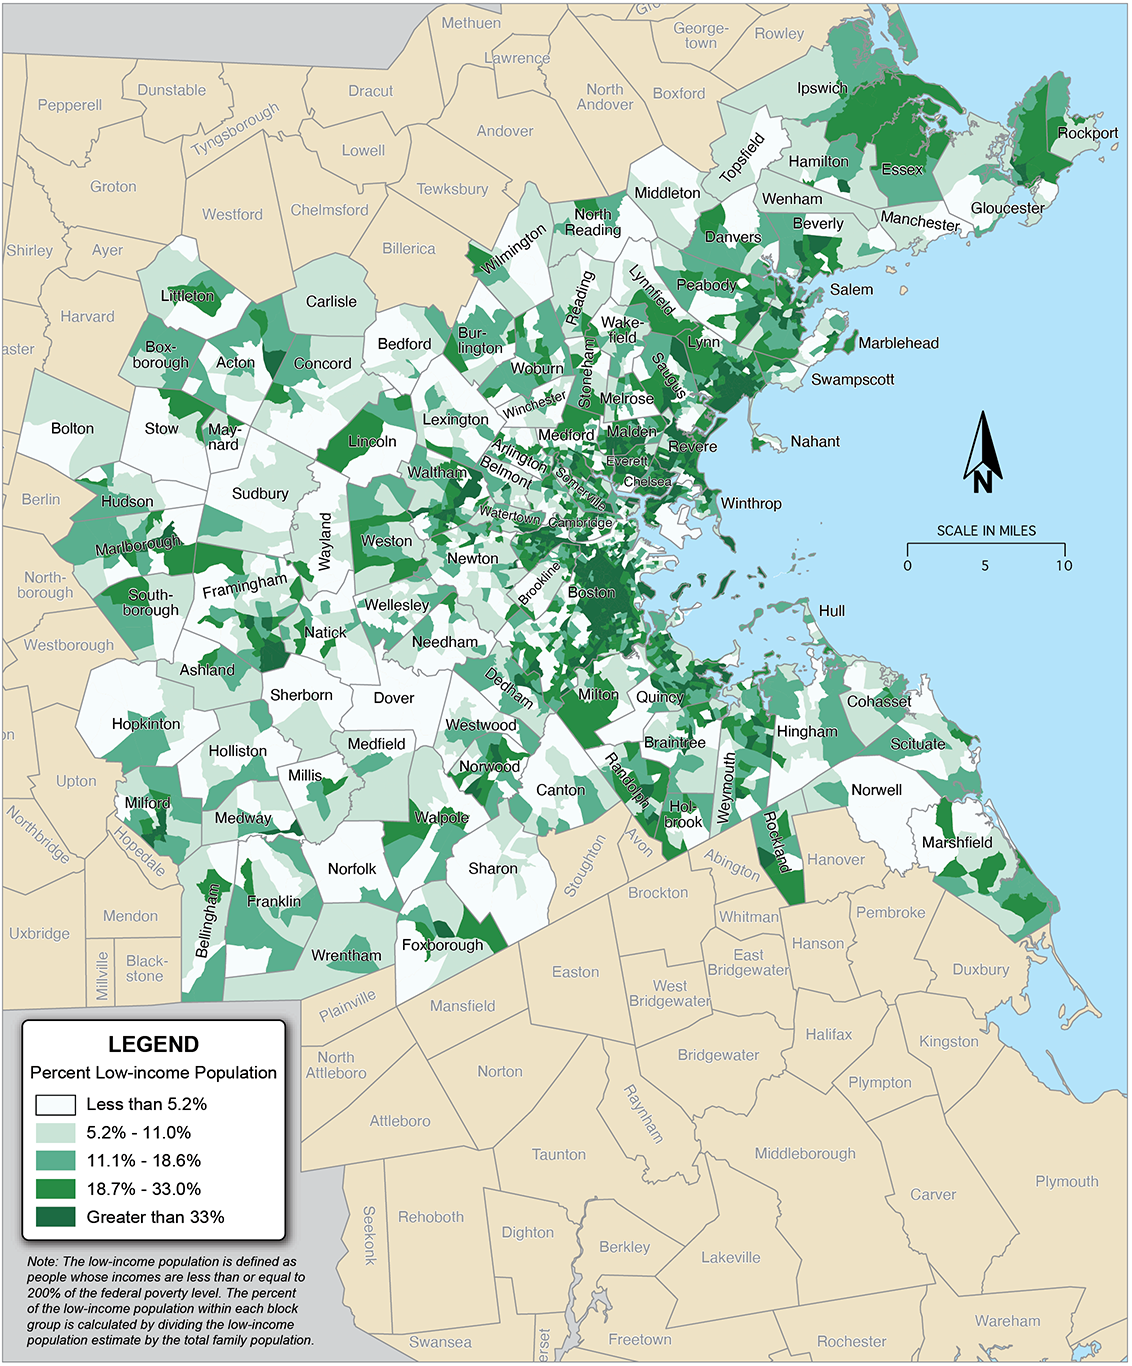 Figure 6-3 is a map showing the percent of the population that has a low income in each block group across the 97 communities in the Boston region.